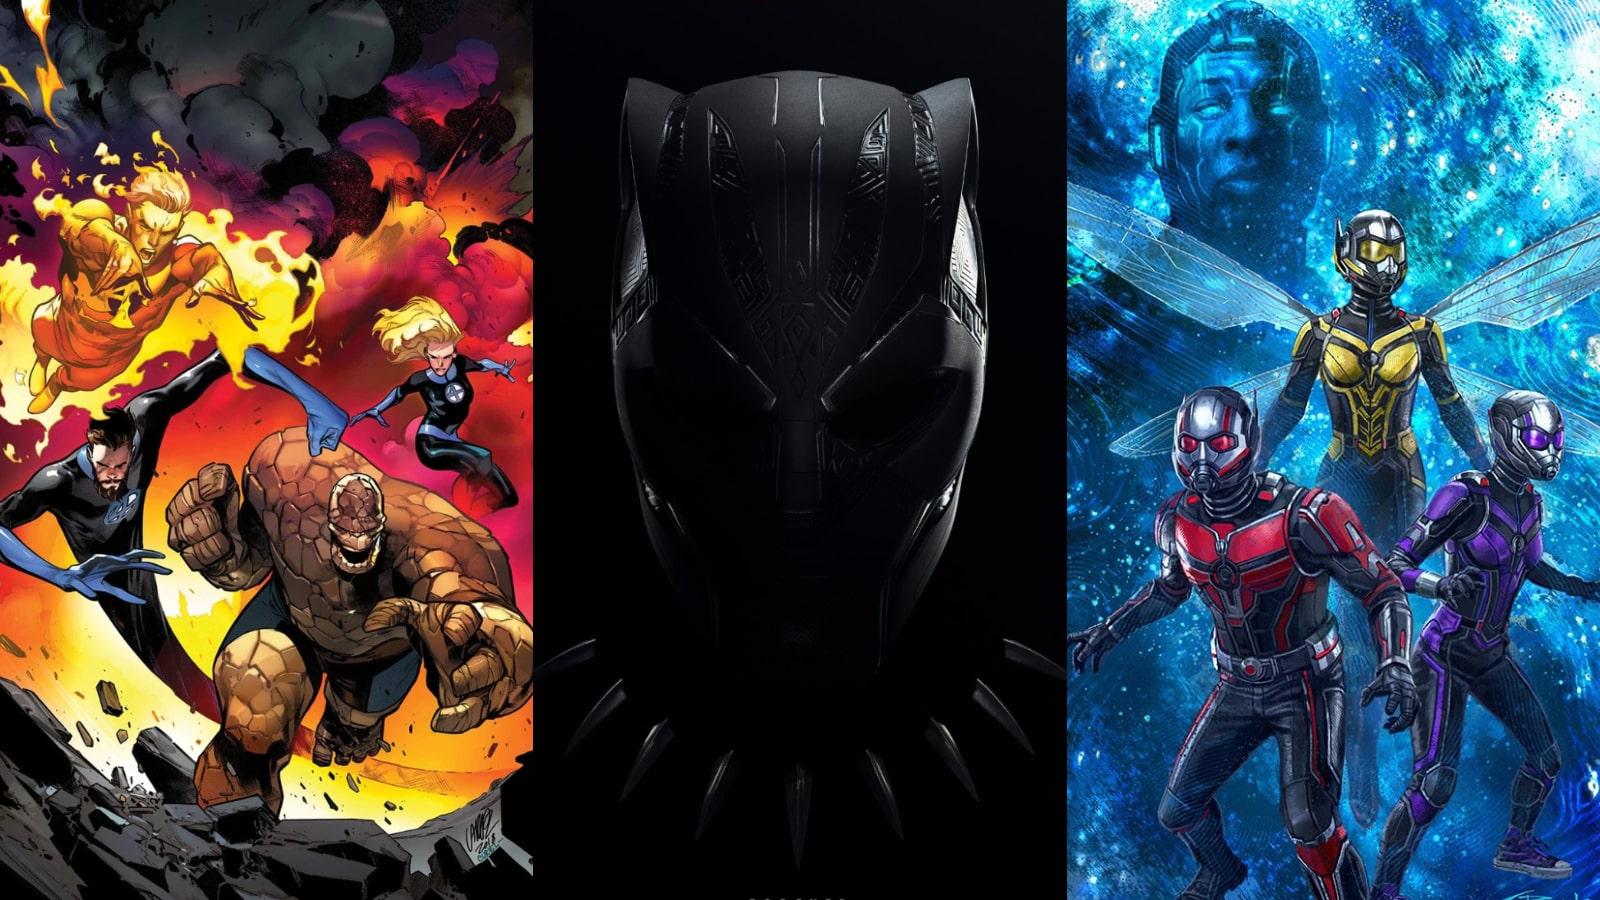 An image of the Fantastic Four comics, Black Panther: Wakanda Forever's poster and the first look at Kang the Conqueror in Ant-Man and the Wasp: Quauntumania